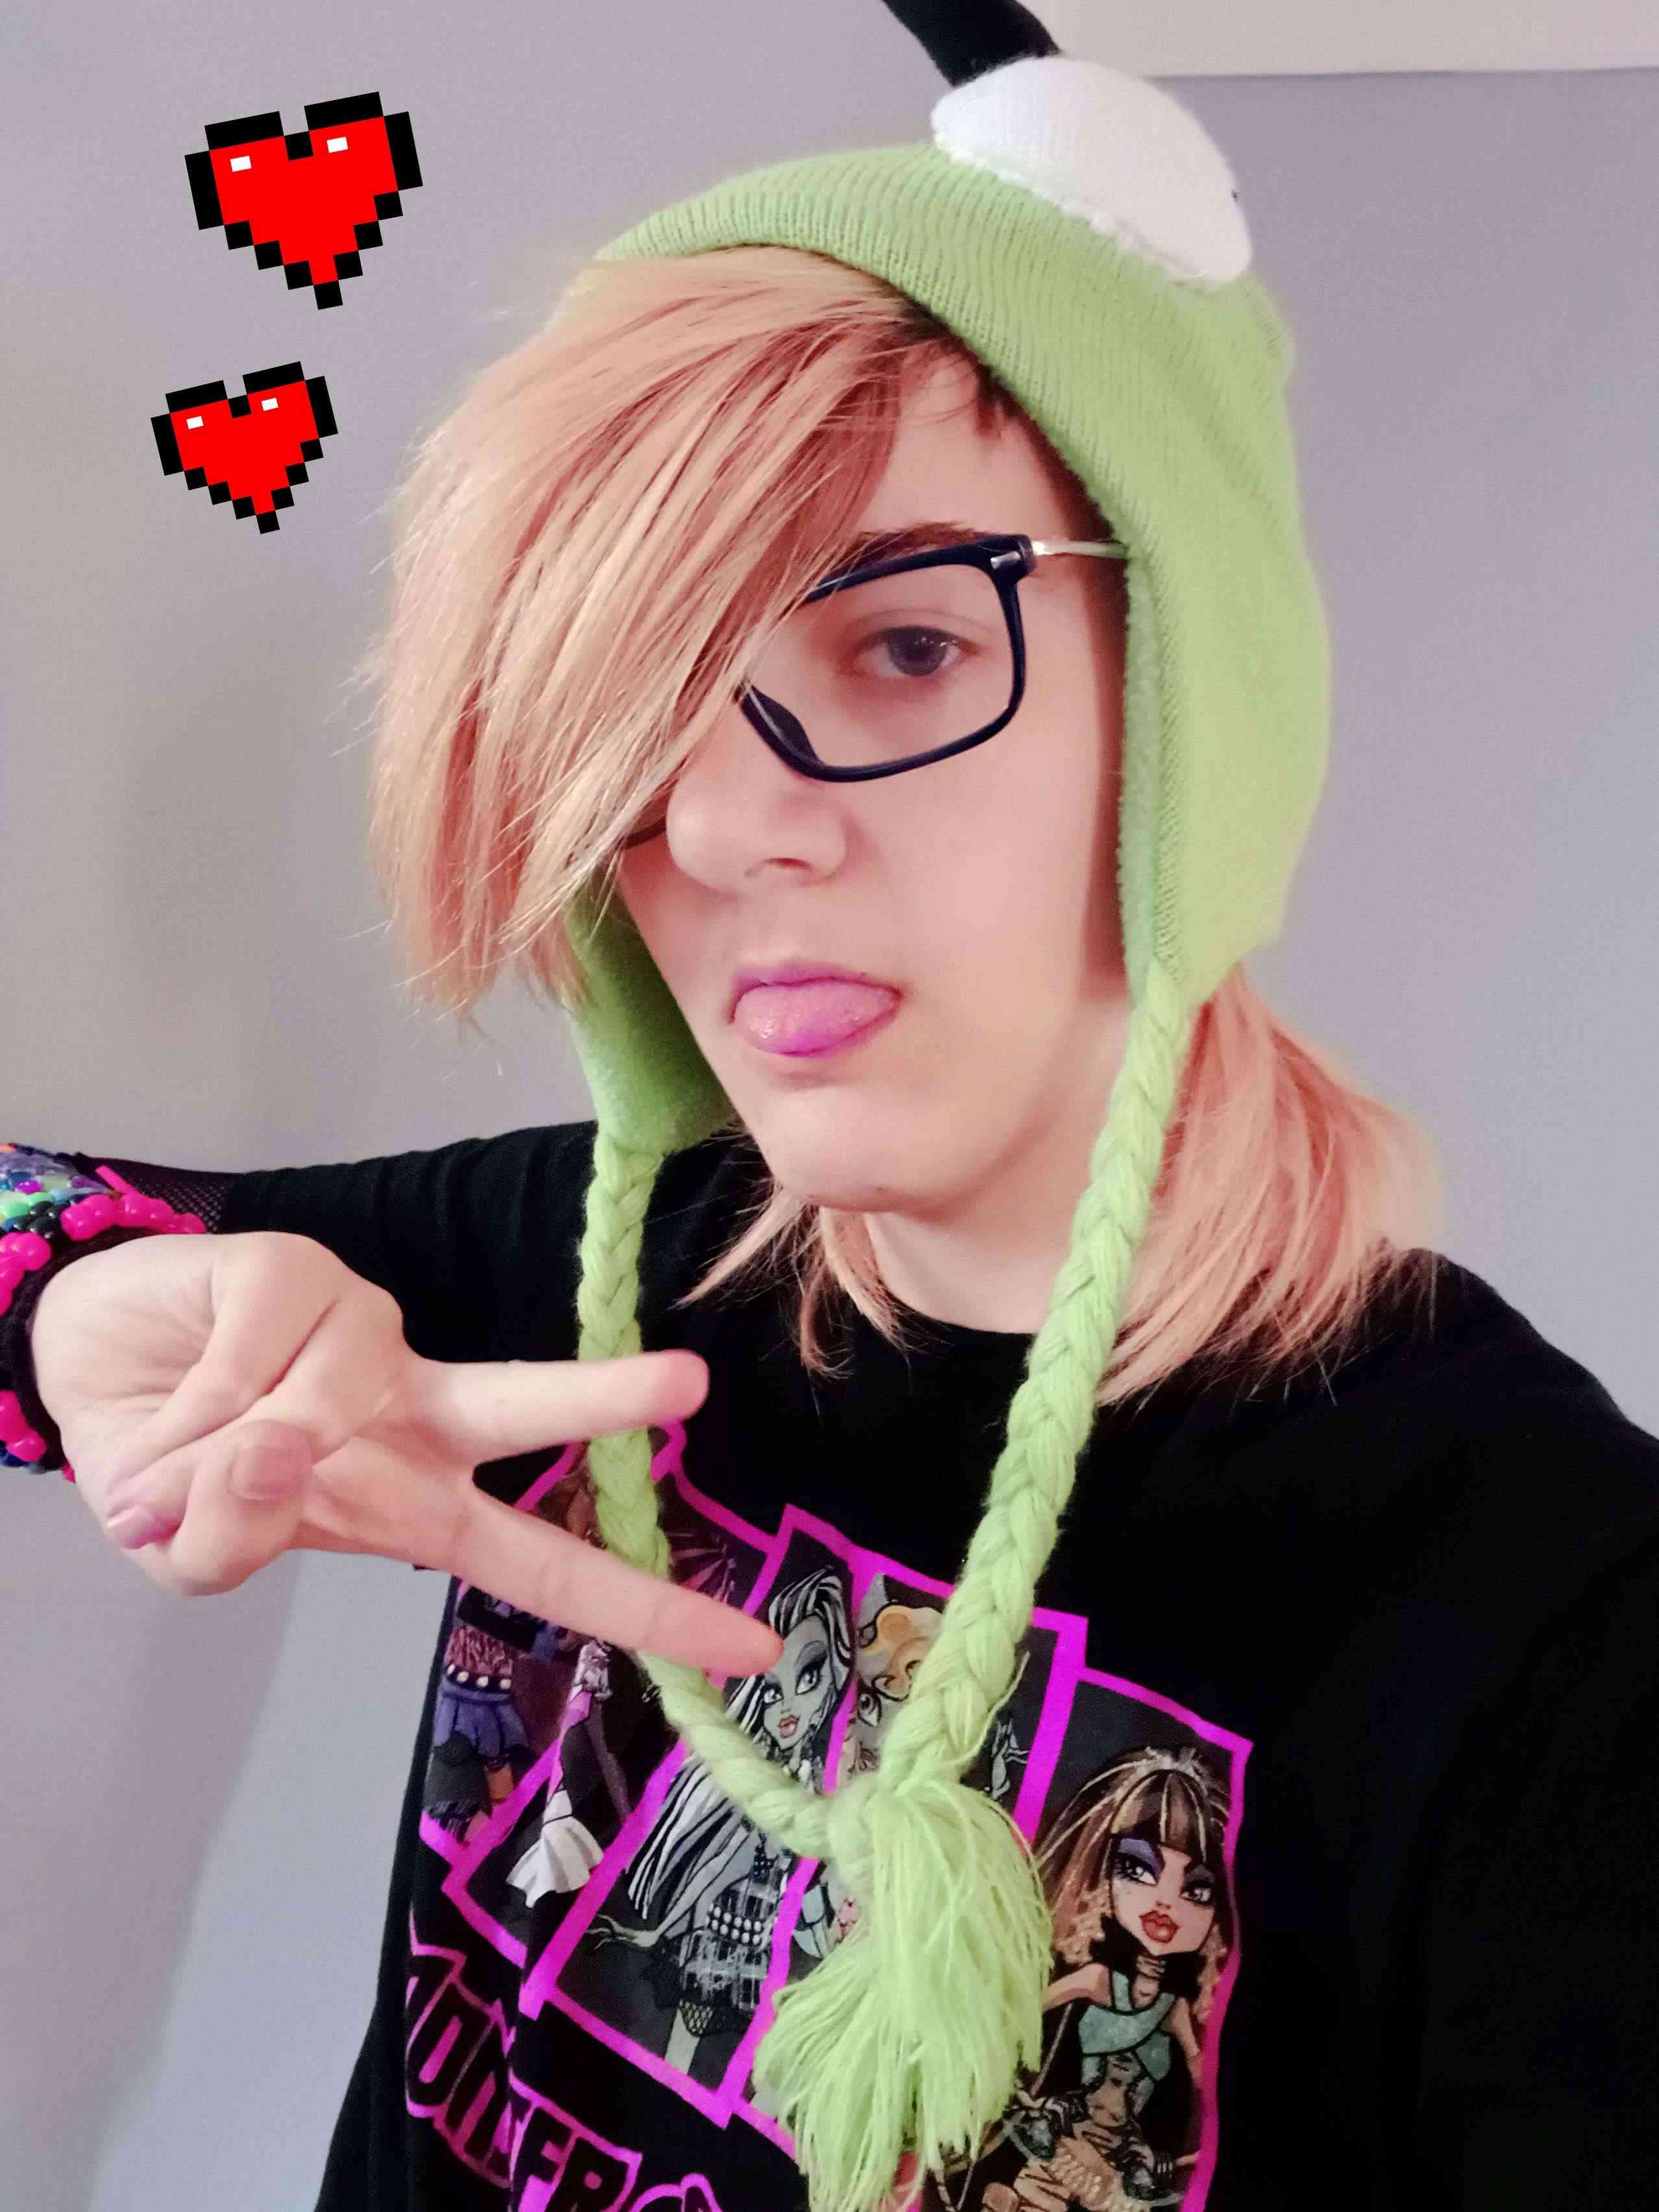 a boy wearing a green hat and a t-shirt with monster high characters. he has bleached hair, glasses, and is holding up a peace sign while sticking out his tongue.